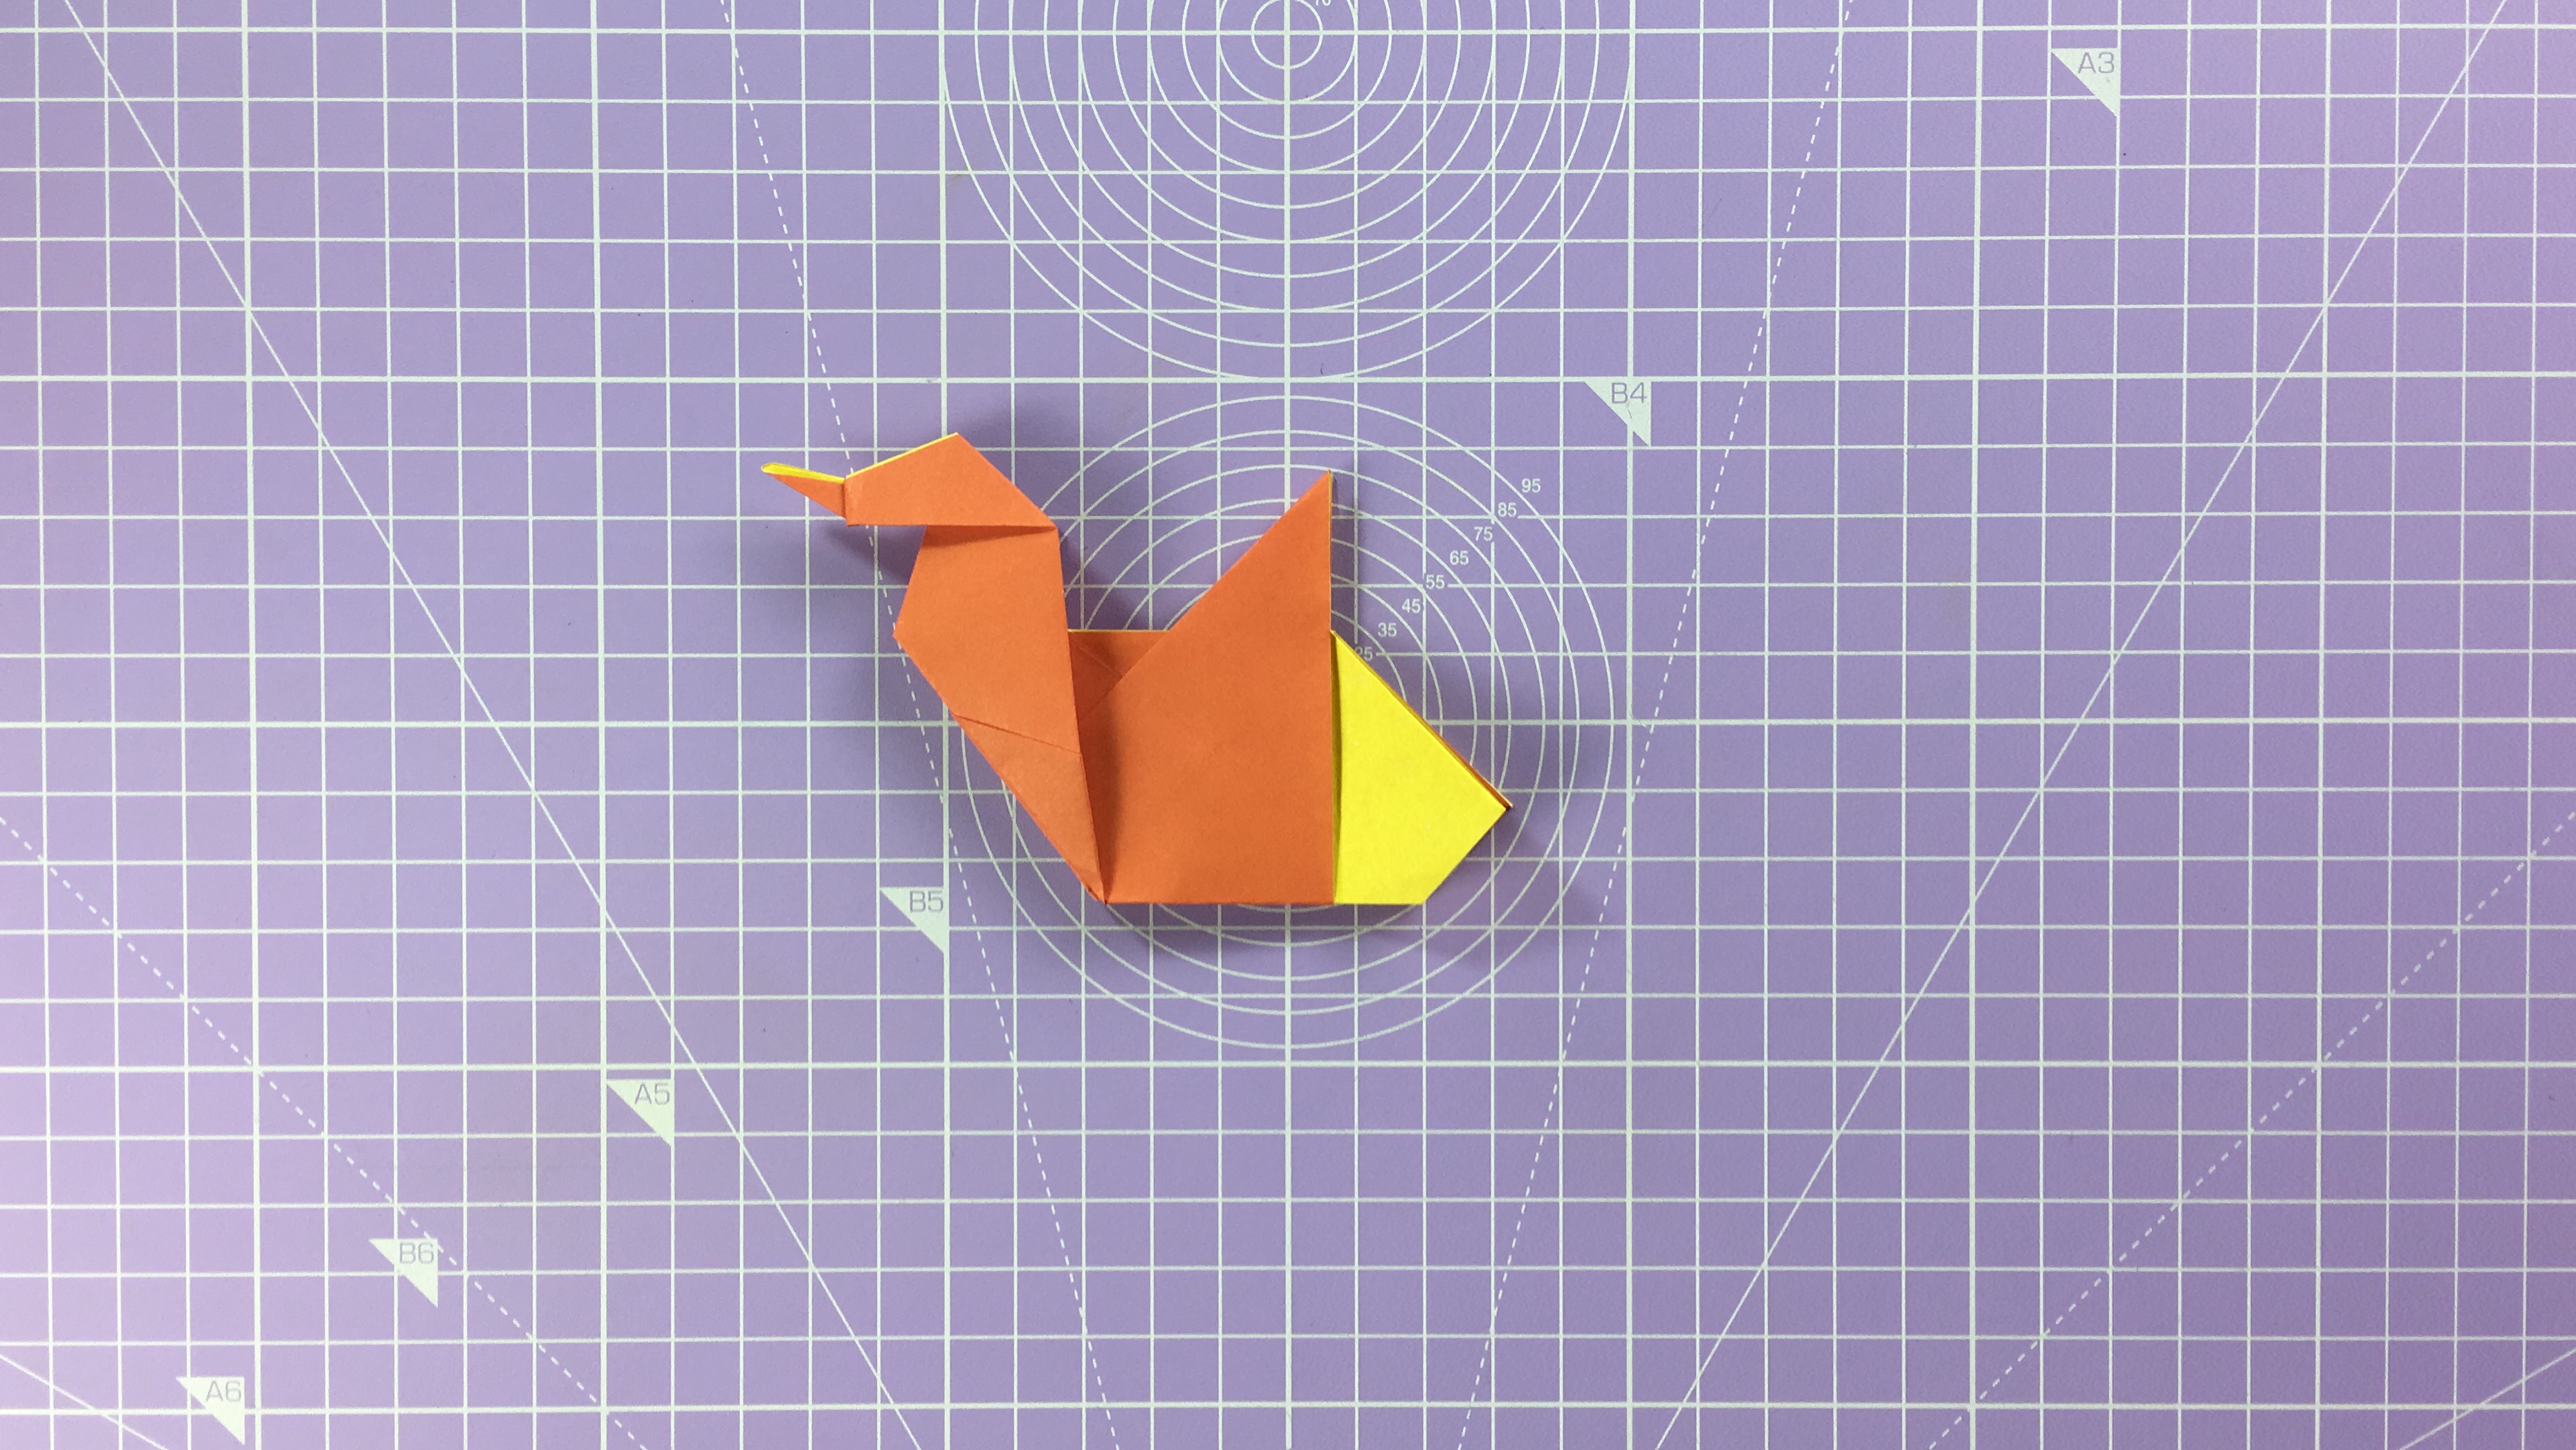 How to make an origami duck - step 19